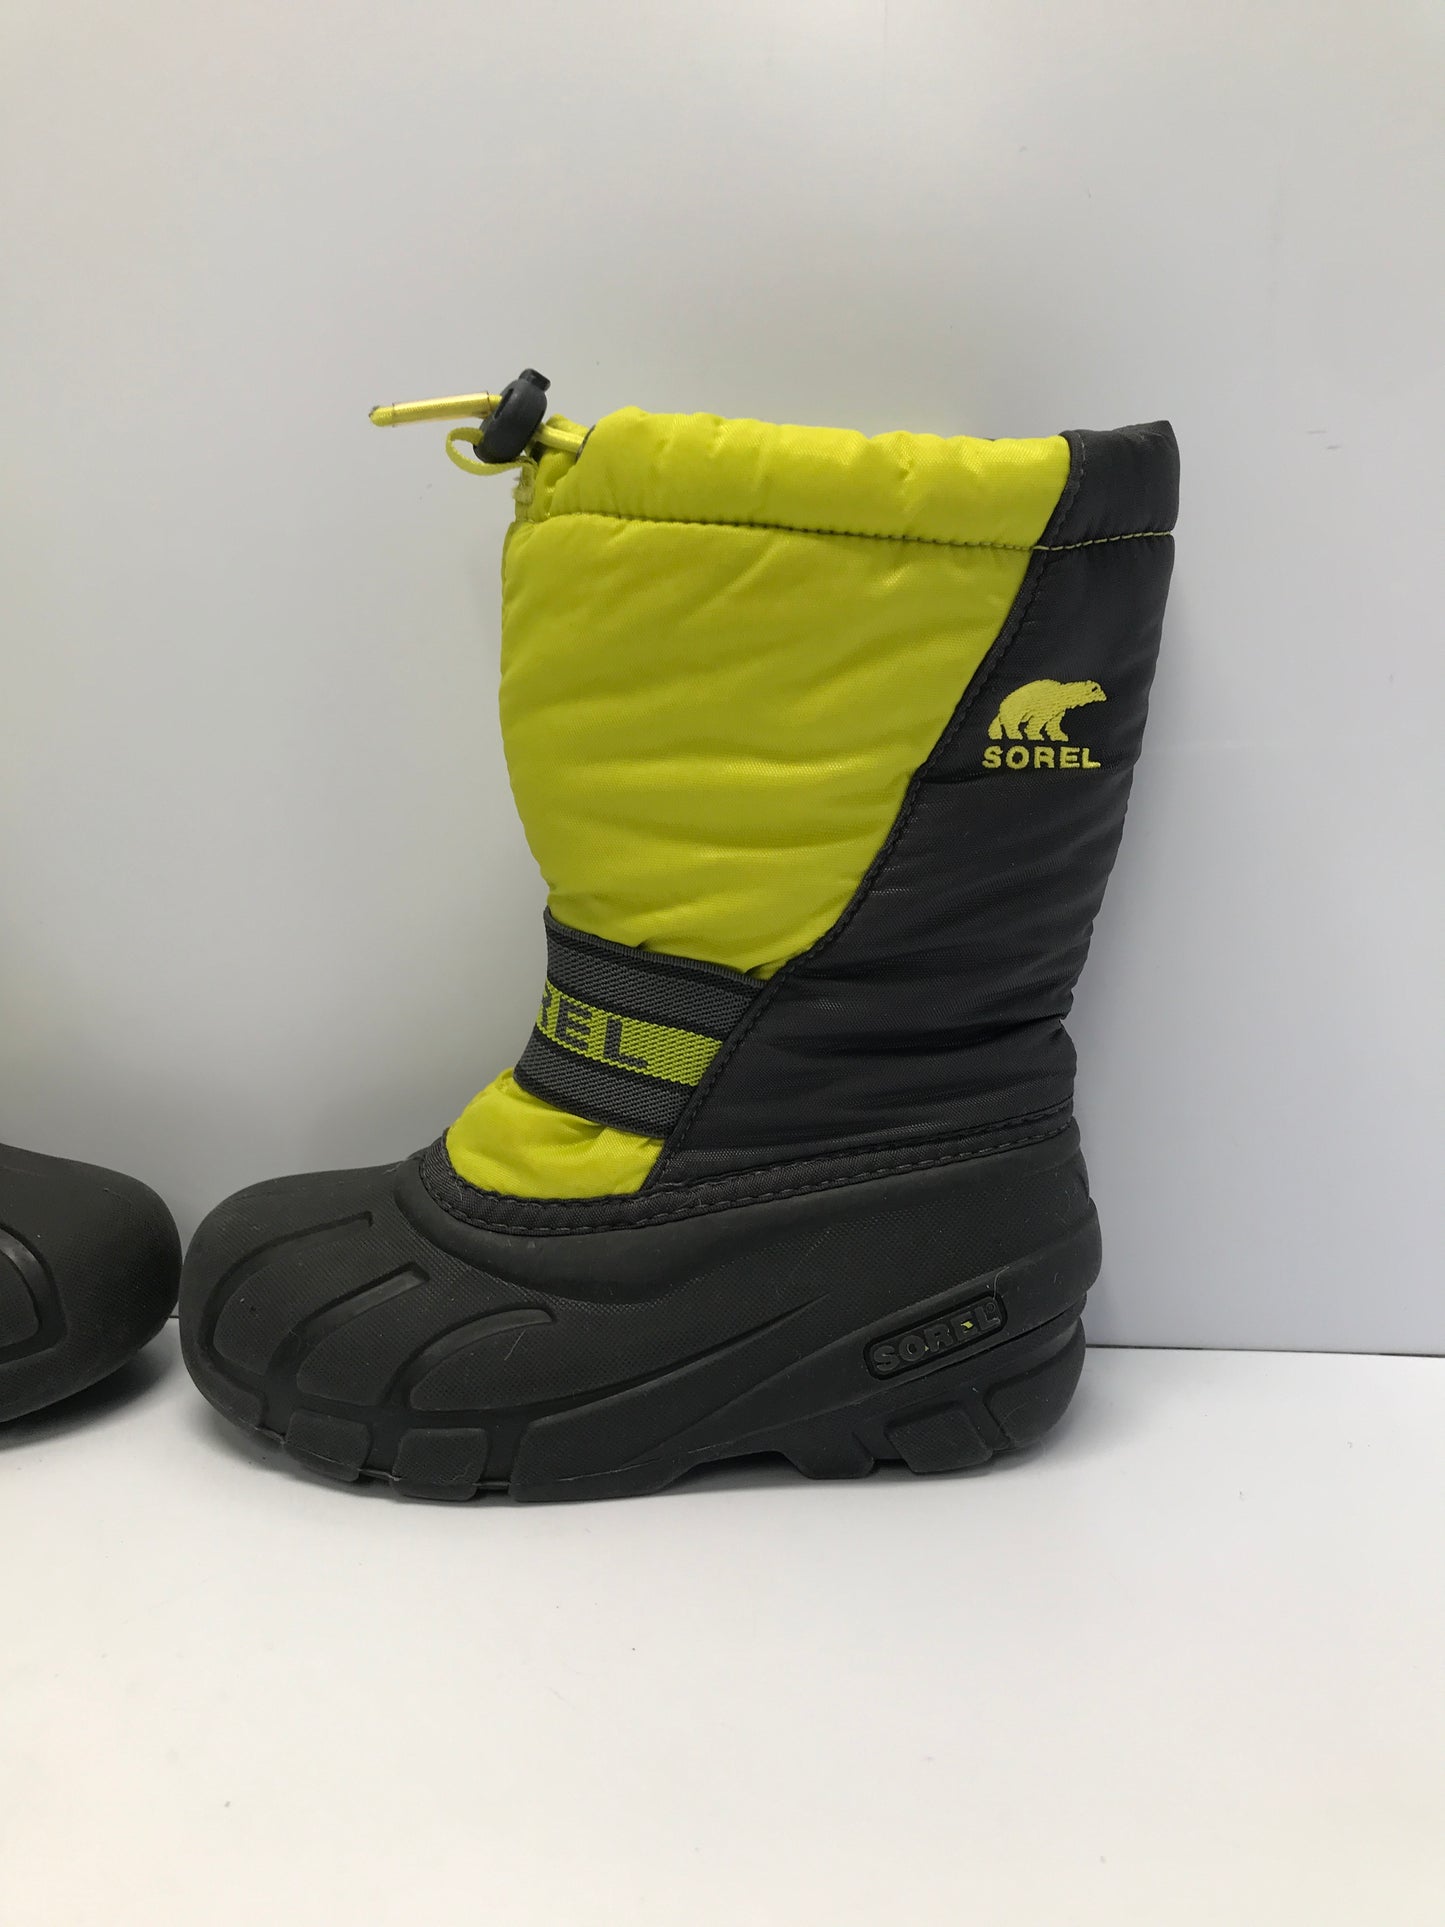 Winter Boots Child Size 13 Sorel Grey Lime With Liner Excellent Condition